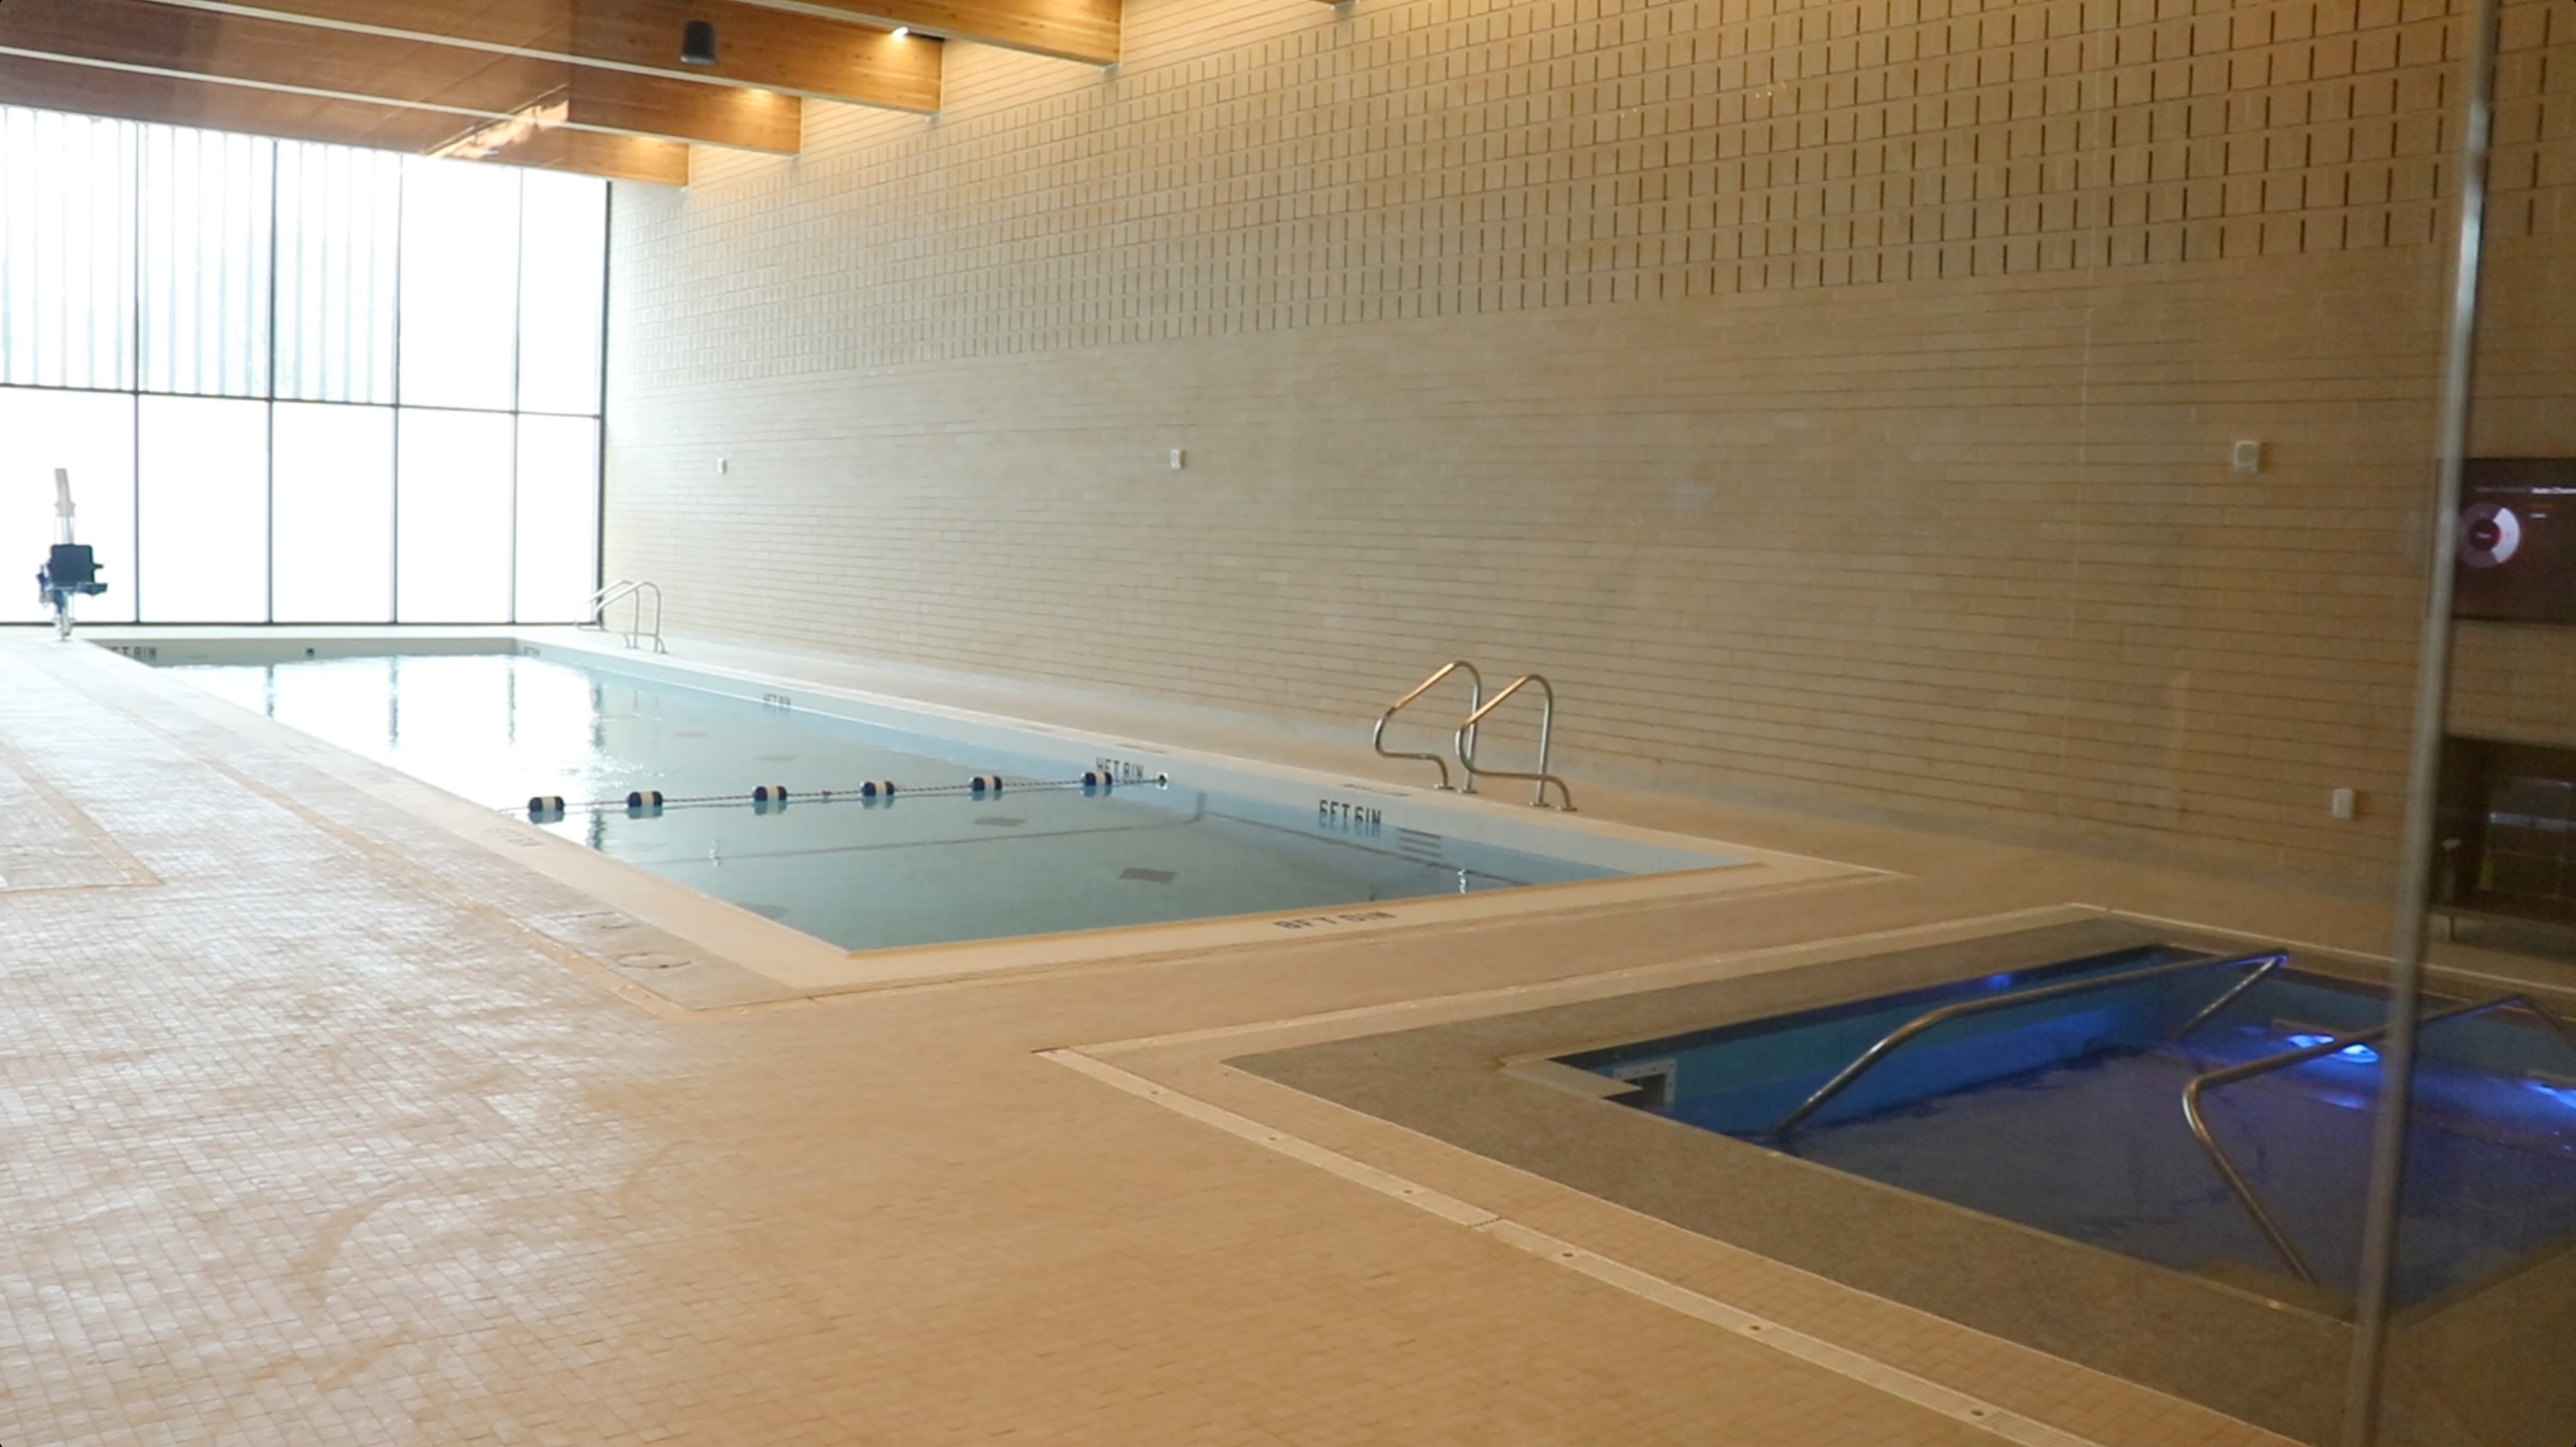 The hydrotherapy pools at the new Spurs training facility